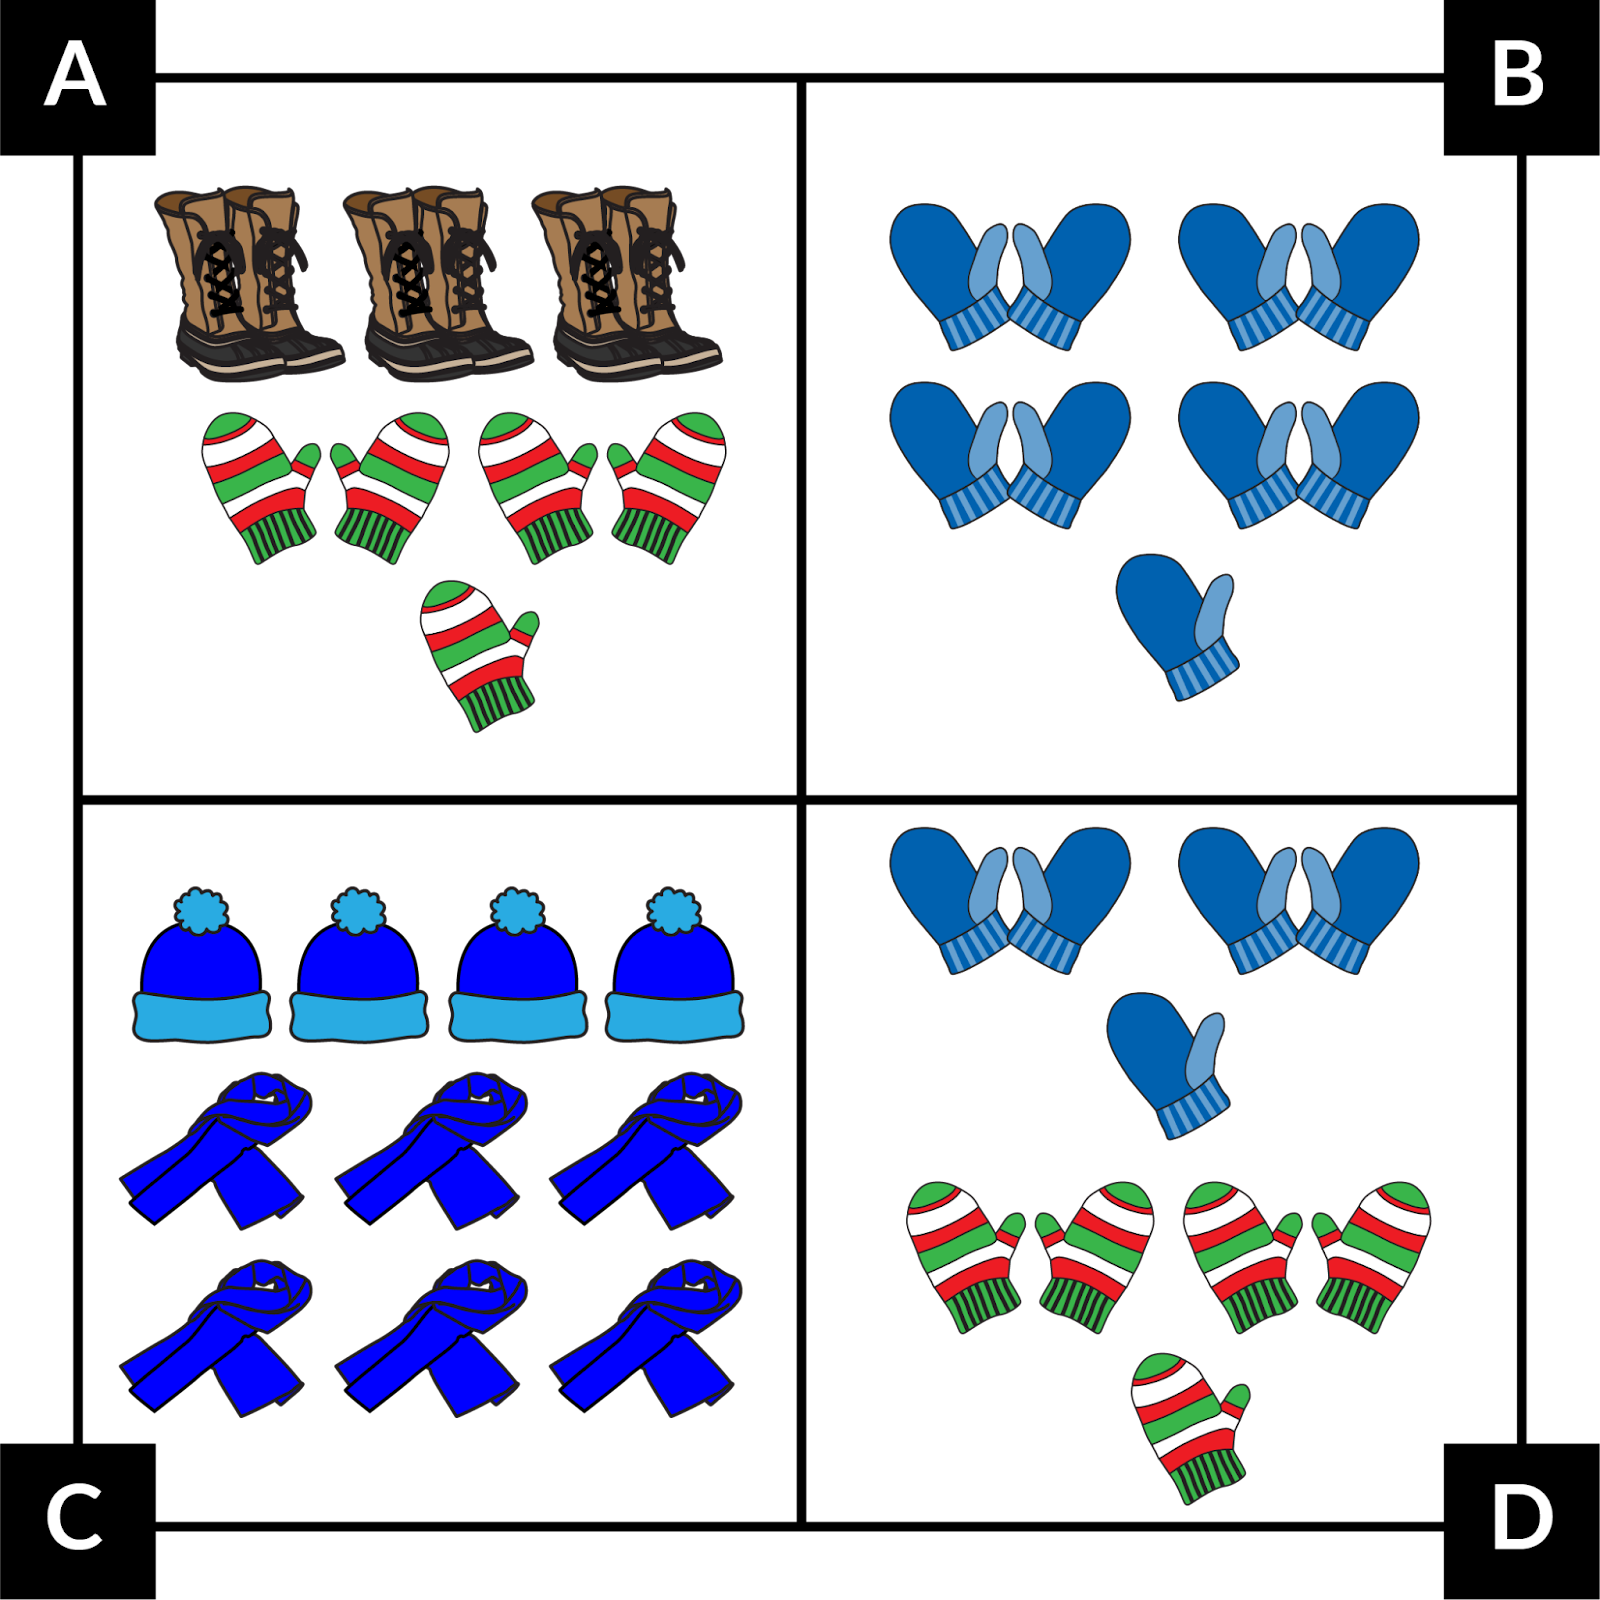 A: 3 pairs of winter boots, 2 pairs of green and red mittens and a single green and red mitten. B: 4 pairs of blue  mittens and a single blue mitten. C: 4 blue winter hats and 6 blue scarves. D: 2 pairs of blue mittens, a single blue mitten, 2 pairs of green and red mittens and a single green and red mitten.